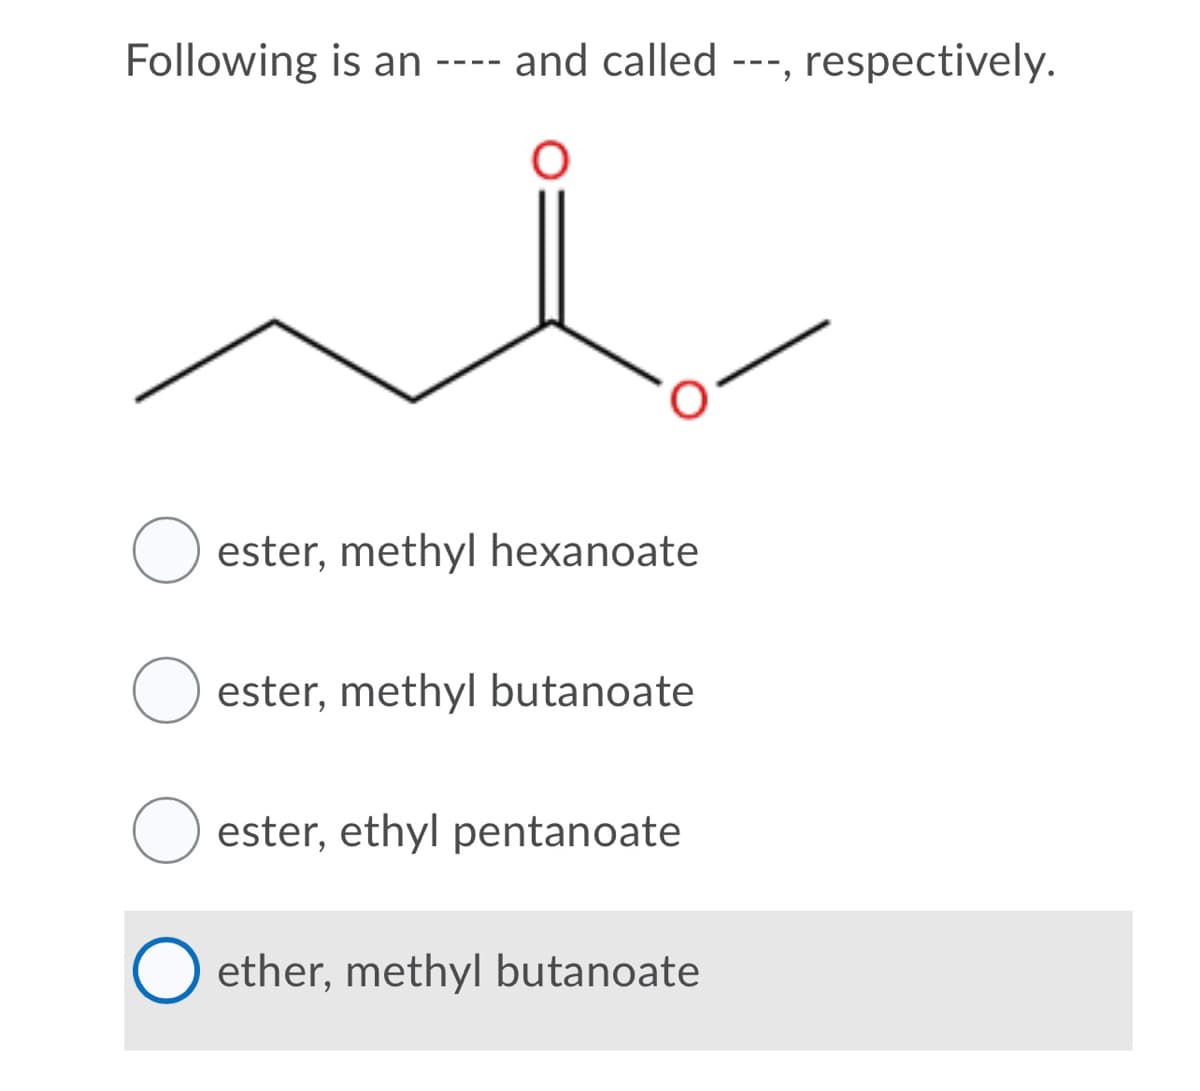 Following is an ---- and called ---, respectively.
ester, methyl hexanoate
ester, methyl butanoate
ester, ethyl pentanoate
ether, methyl butanoate
